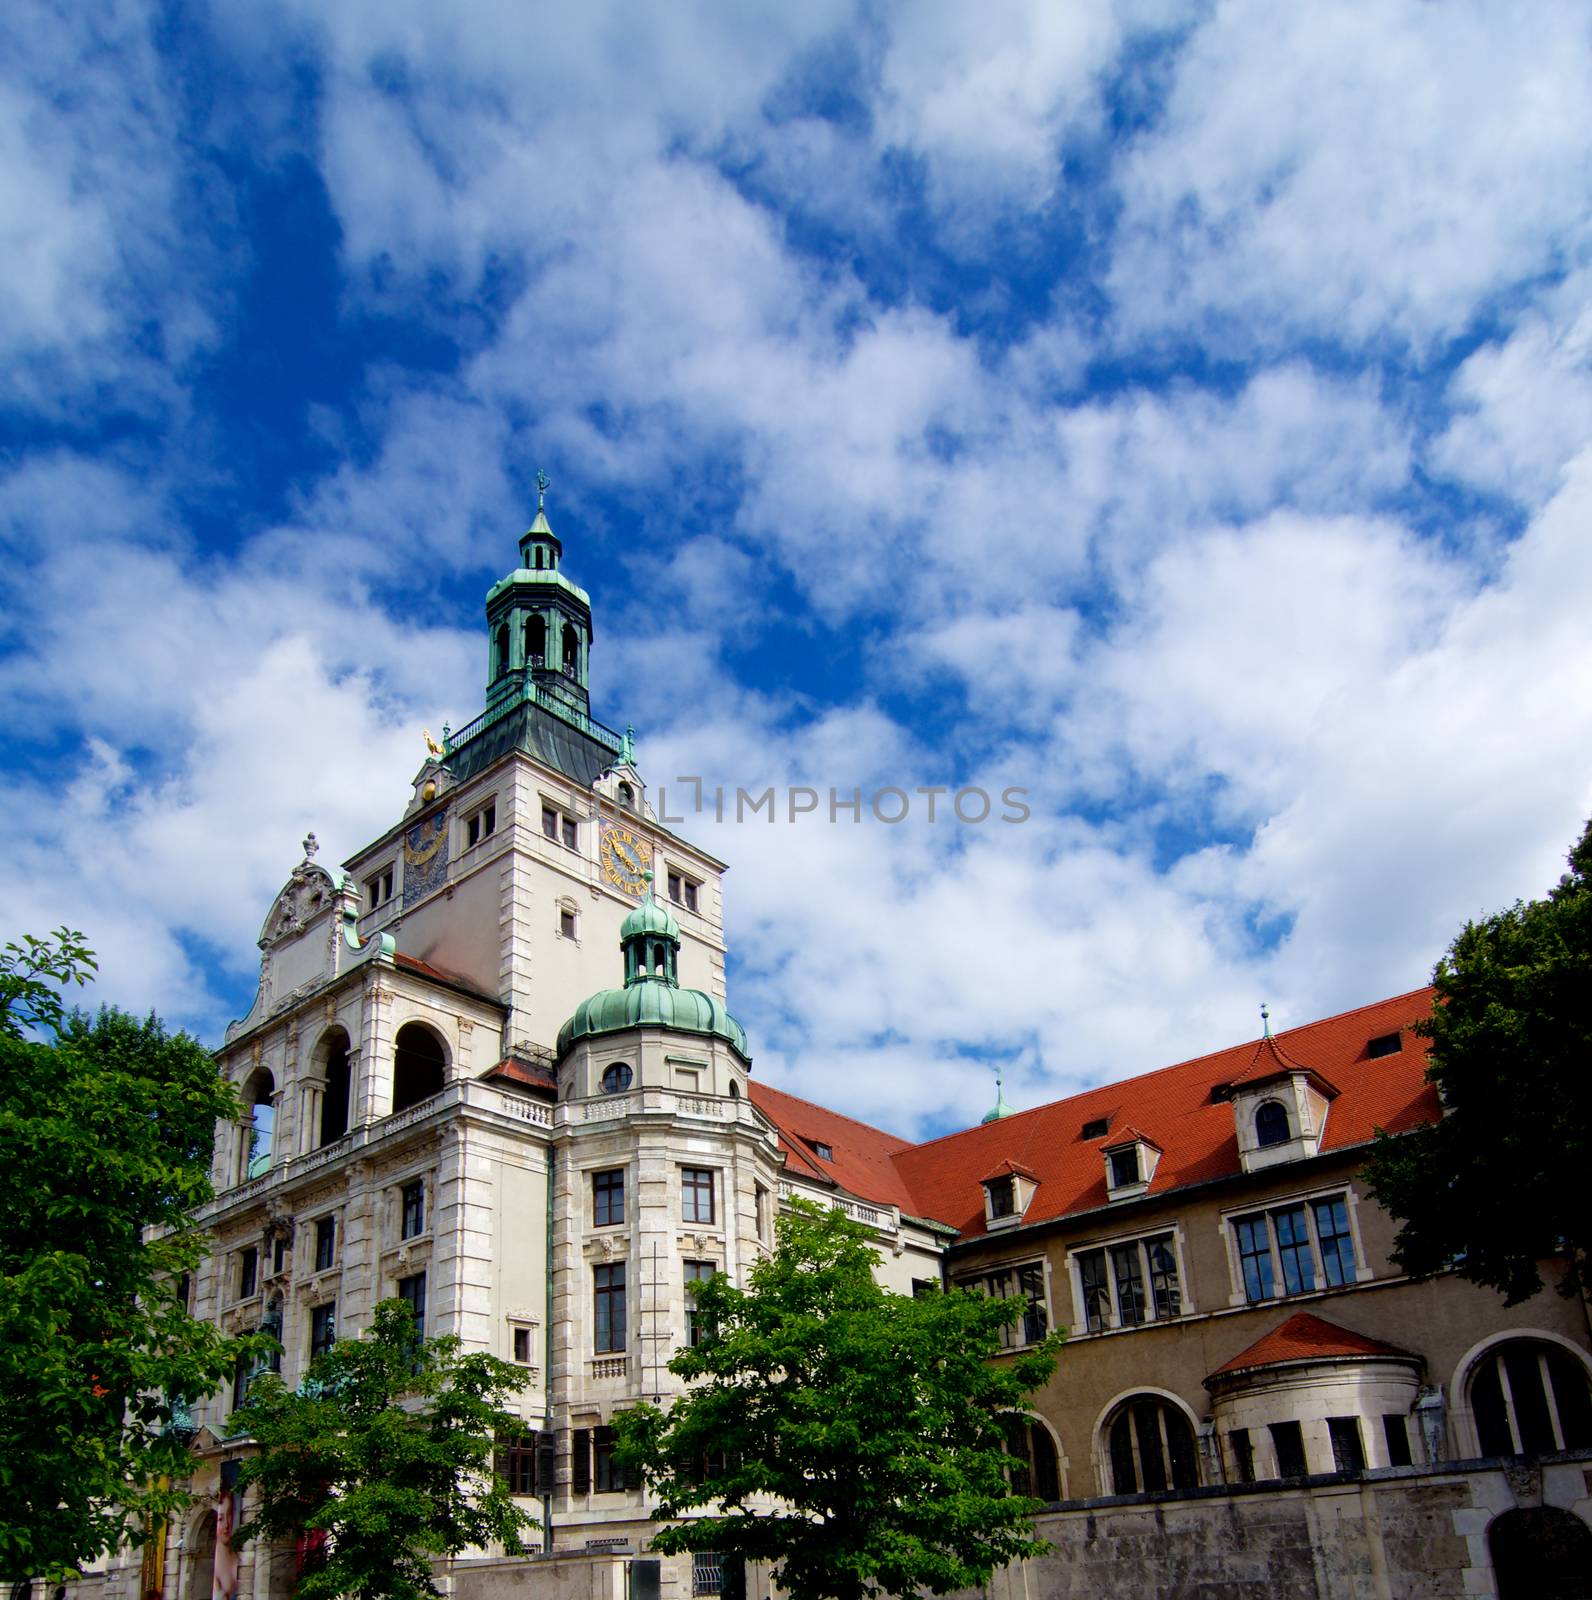 Building of Bavarian National Museum Bottom up View against Cloudy Blue Sky Outdoors. Munich, Germany